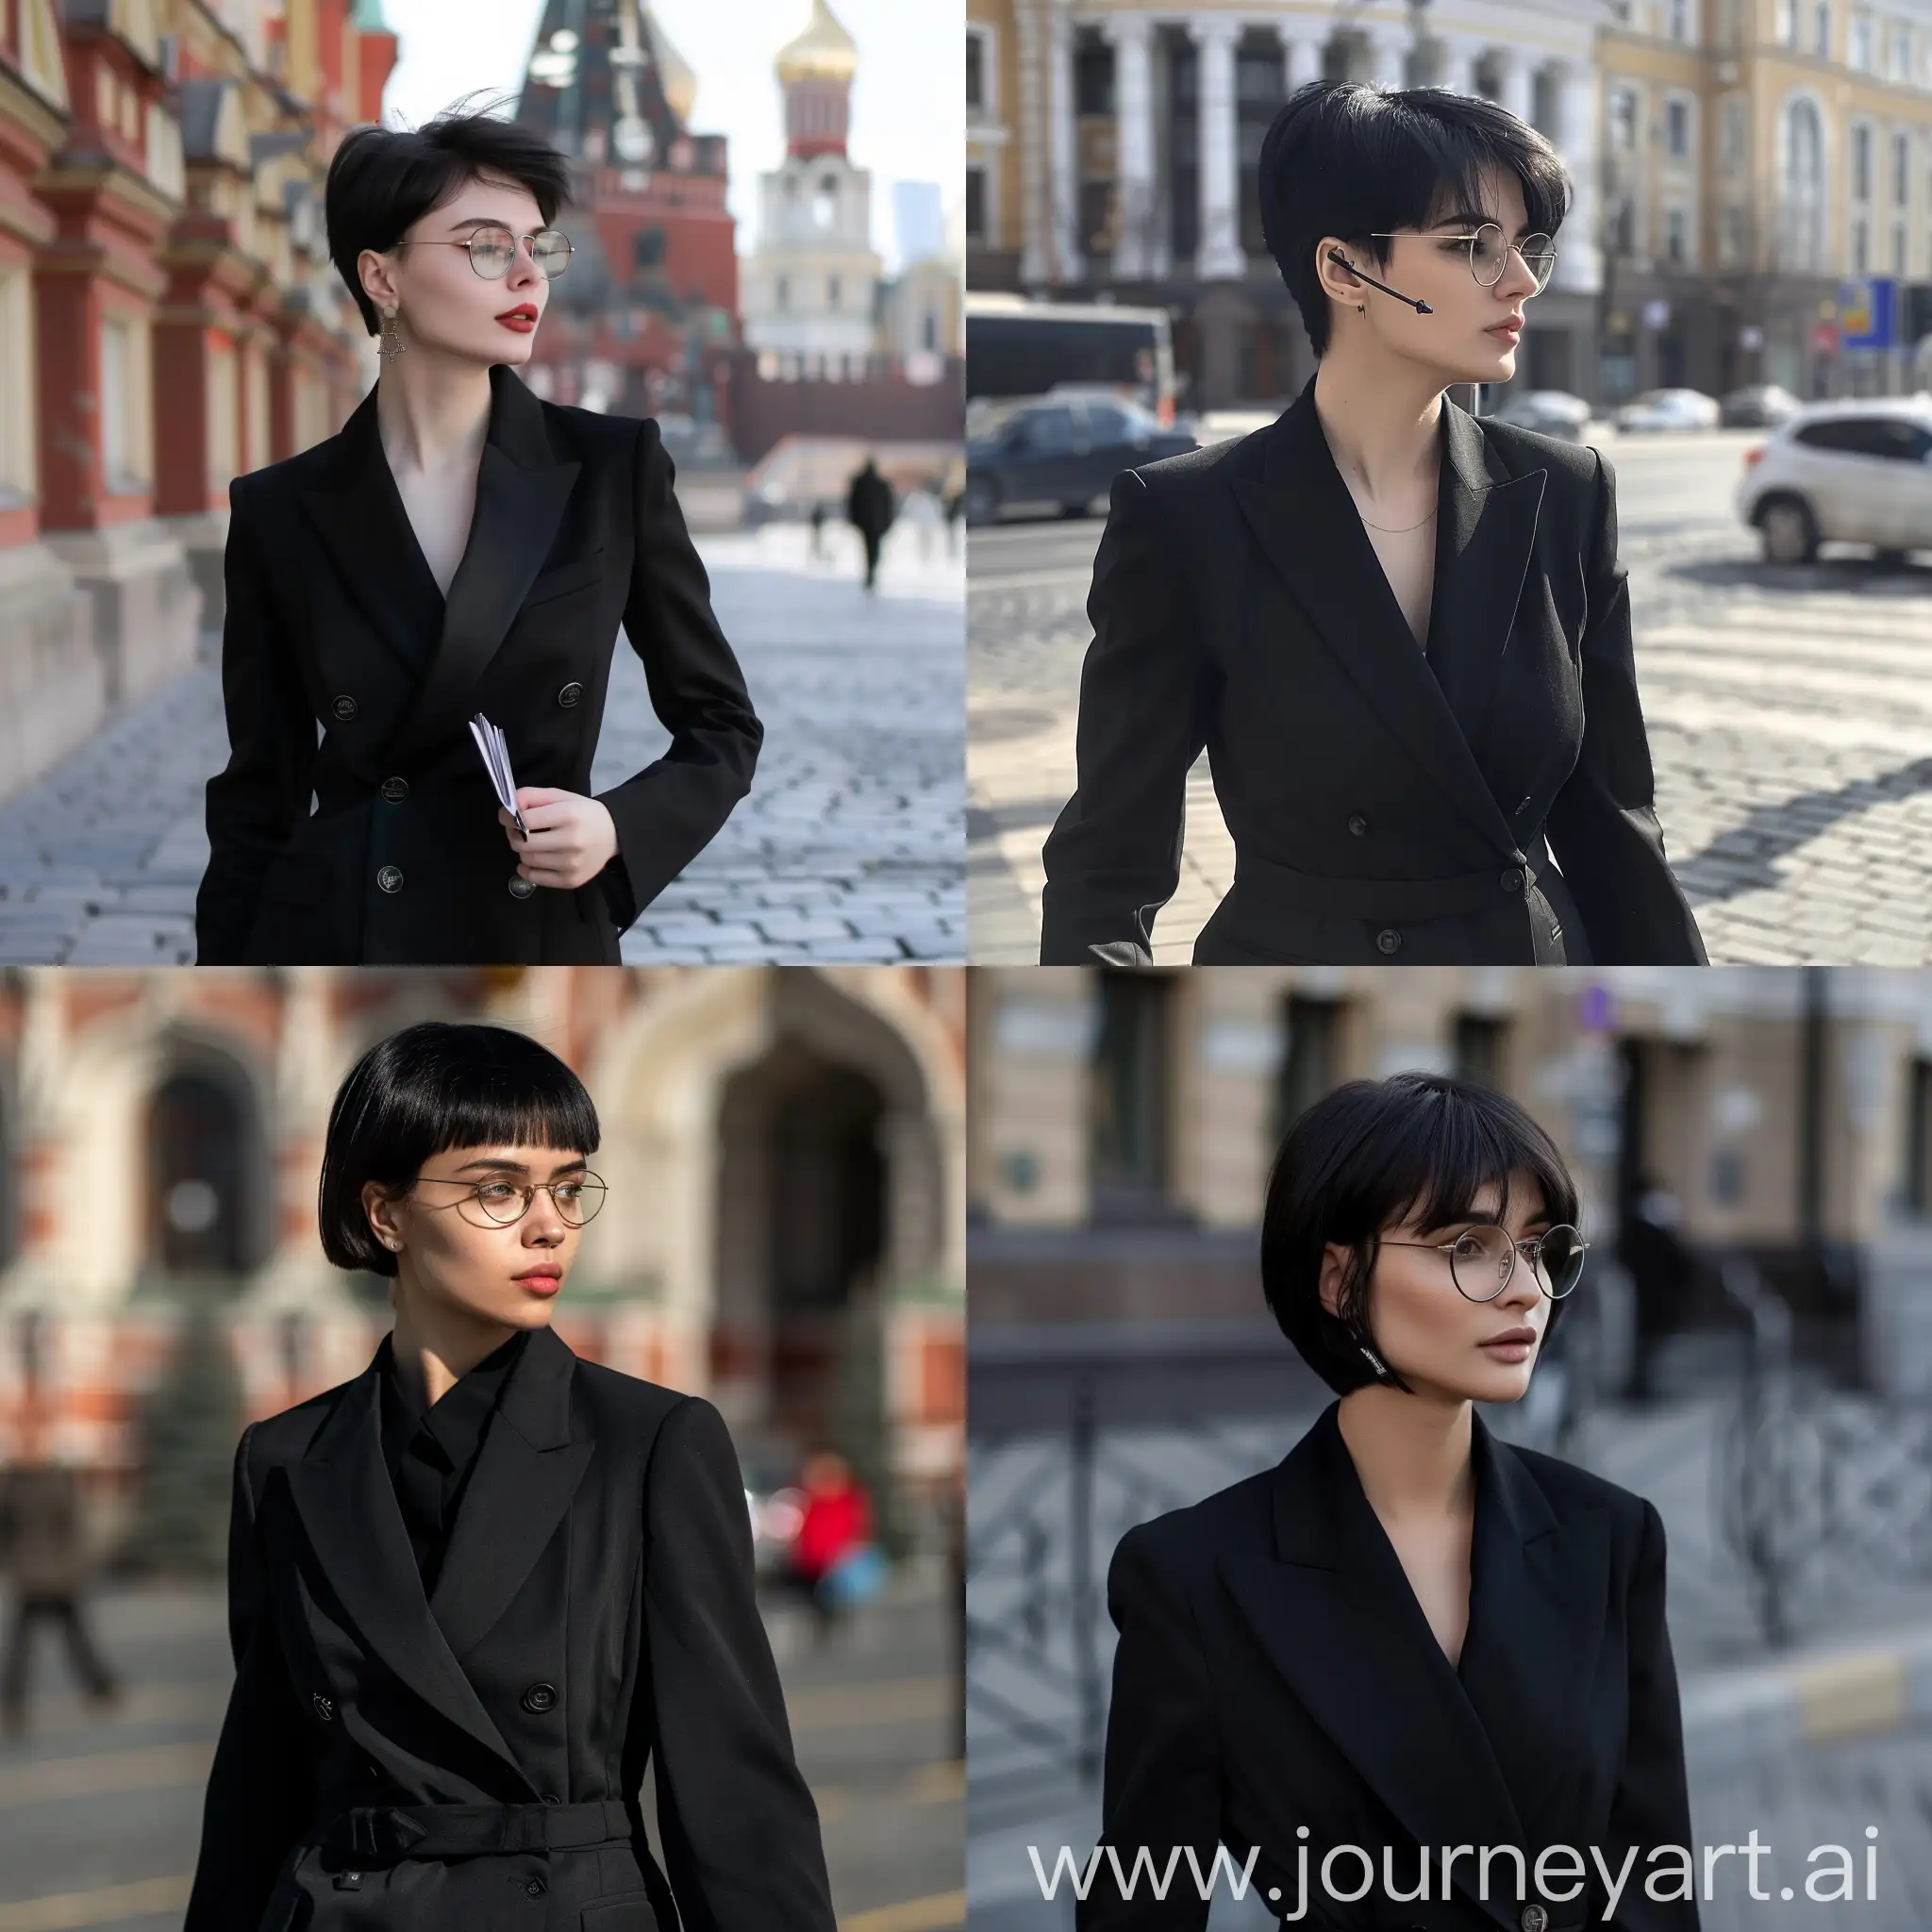 Stylish-Russian-Reporter-Strolls-Moscow-Streets-in-Black-Suit-and-Reading-Glasses